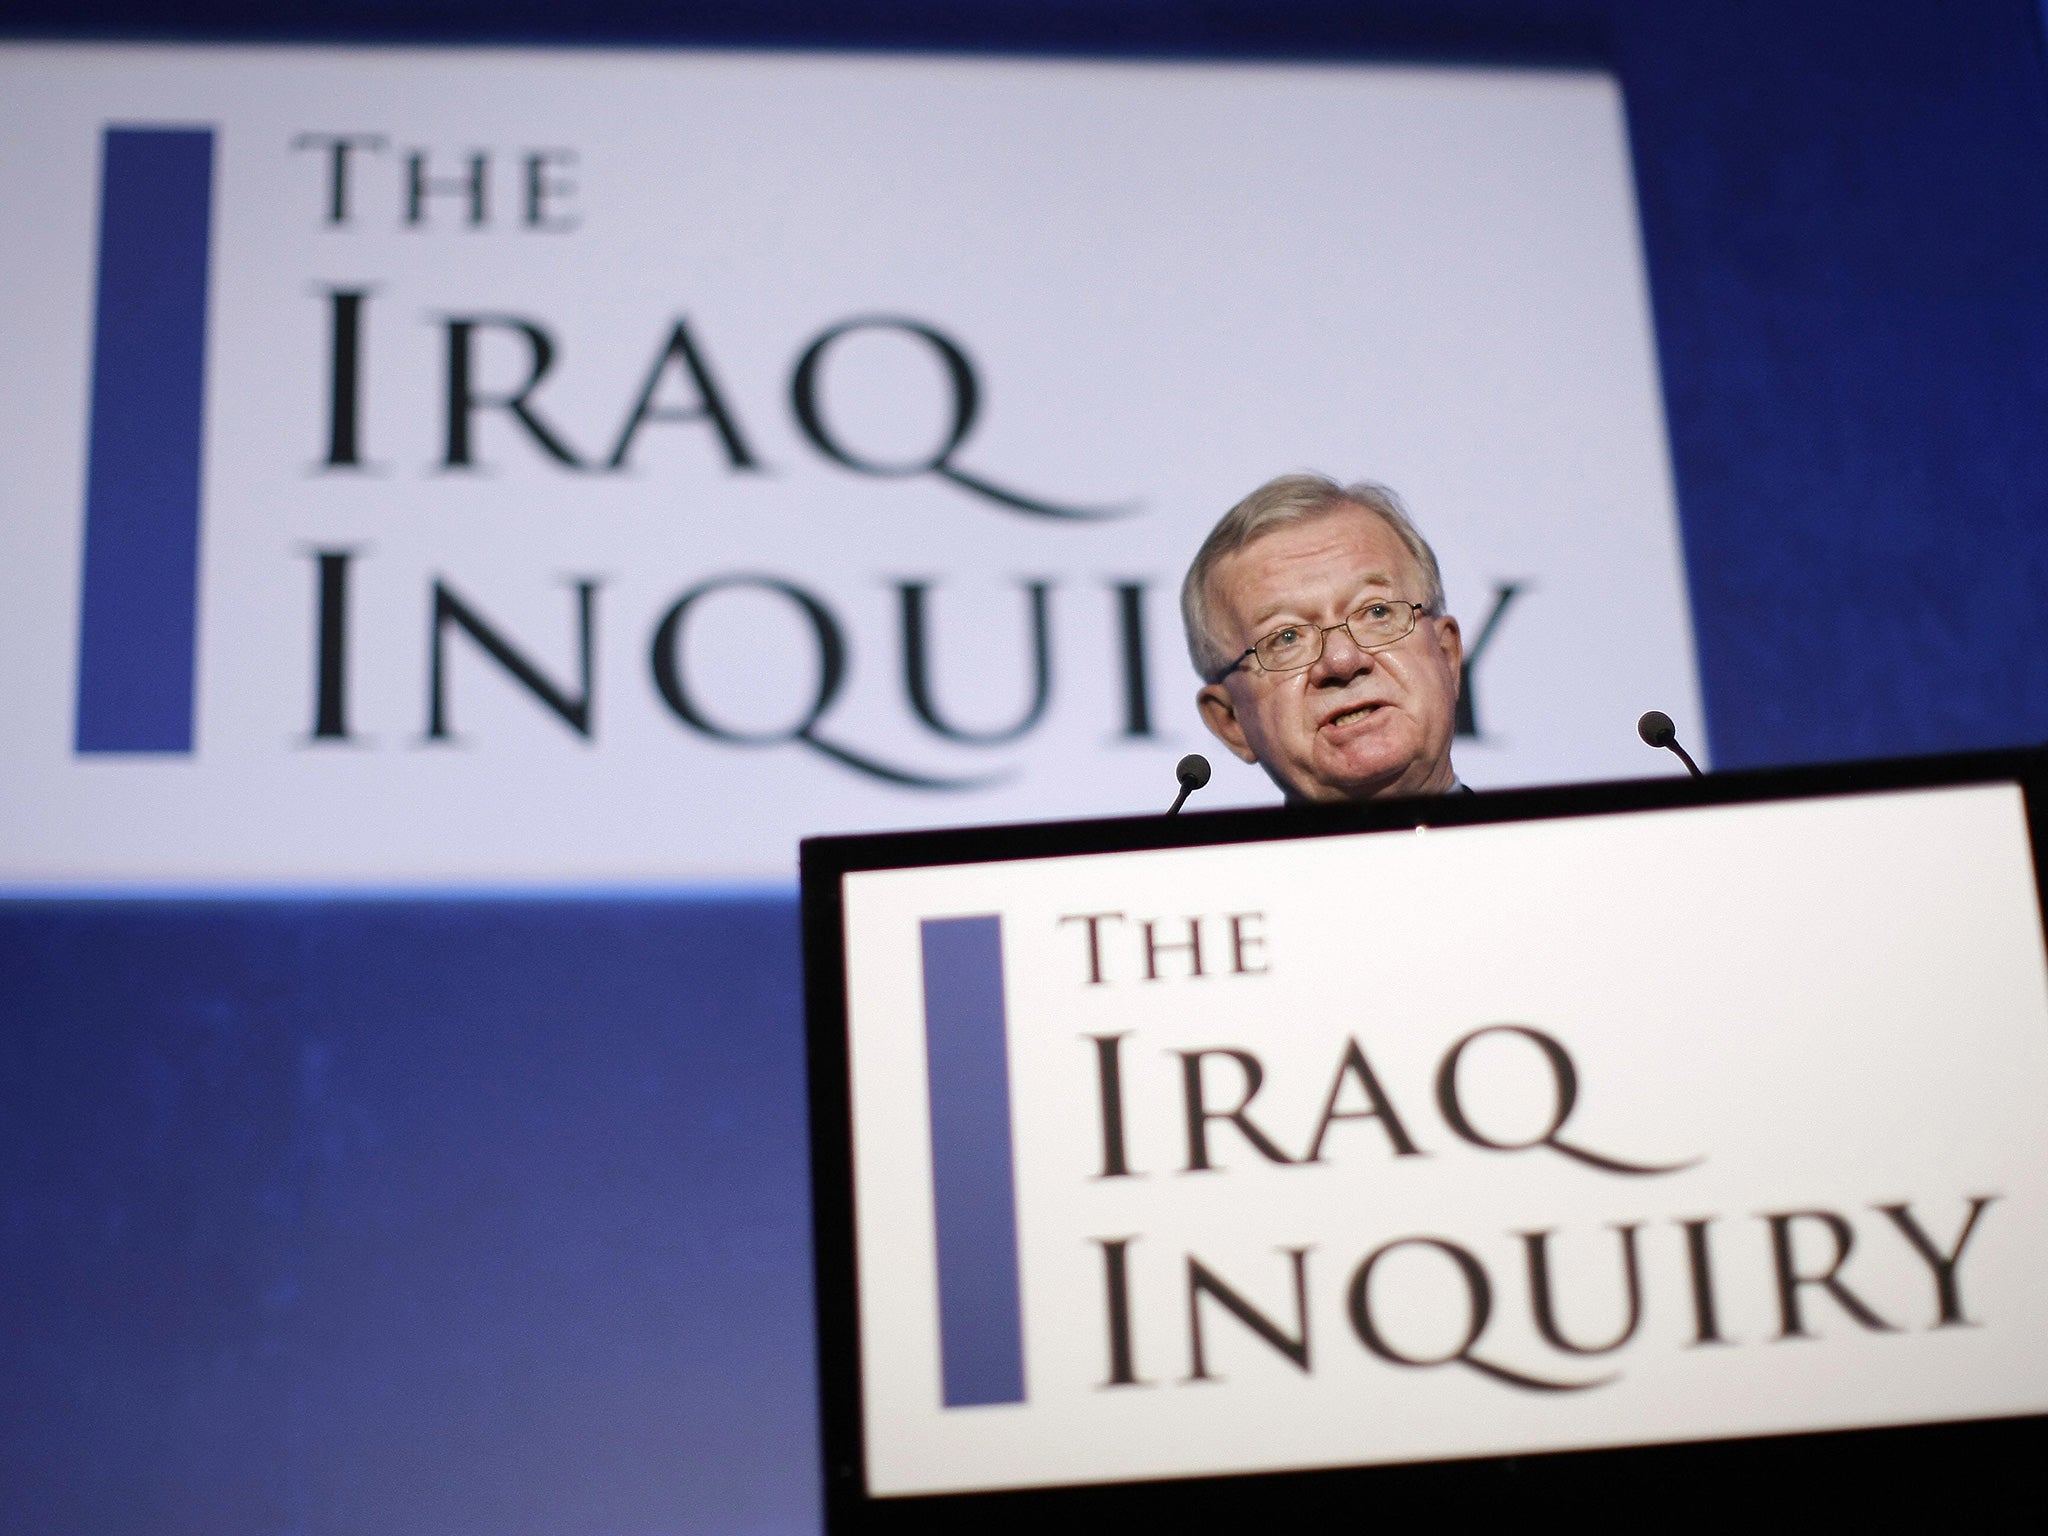 On 6 July 2016, Sir John Chilcot will publish his report on the Iraq war